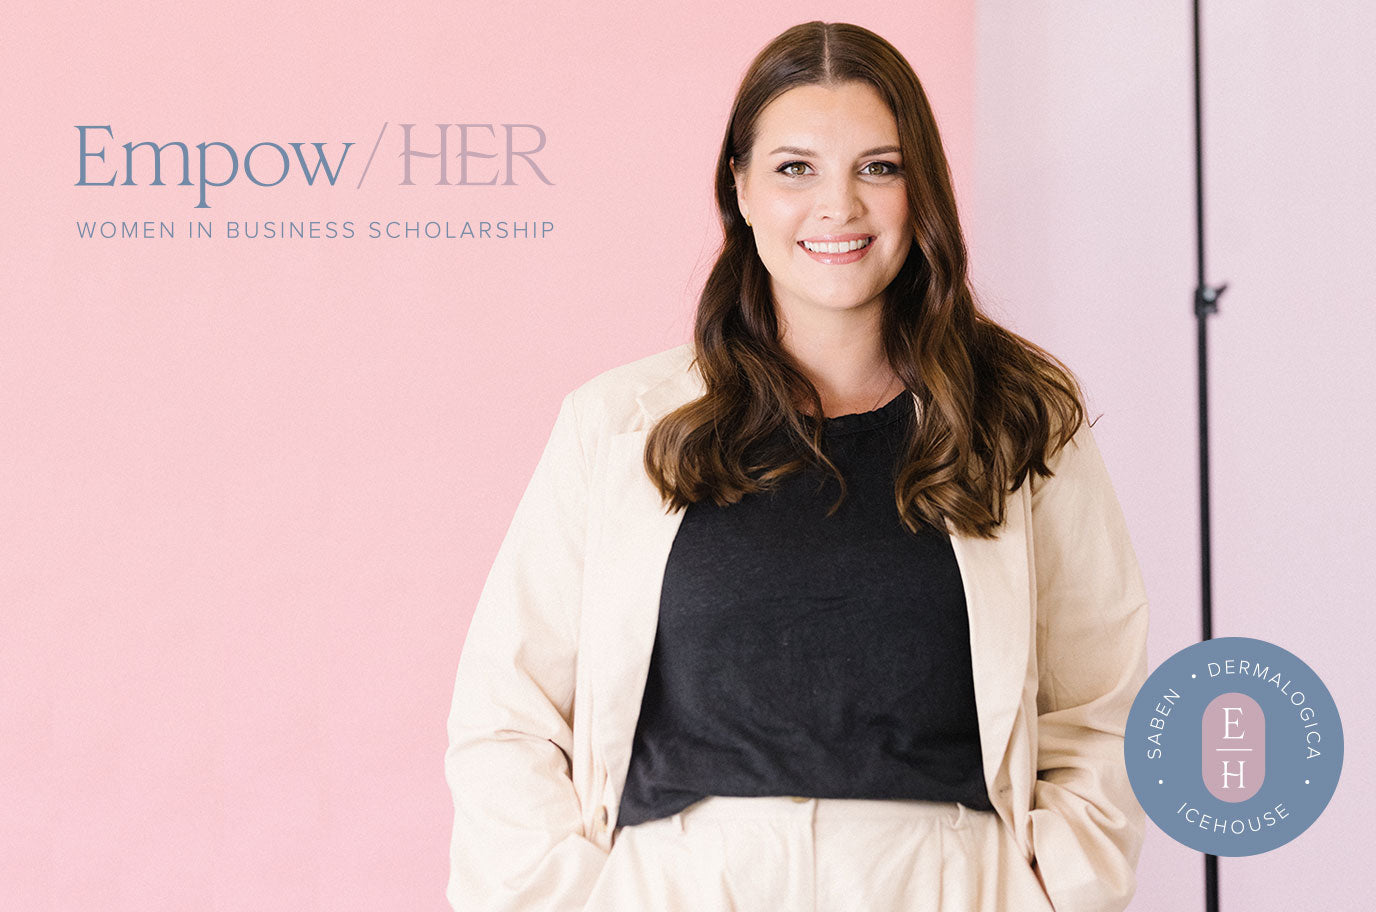 Announcing the winner of Empow/HER | Anna Barlow of Mom Store